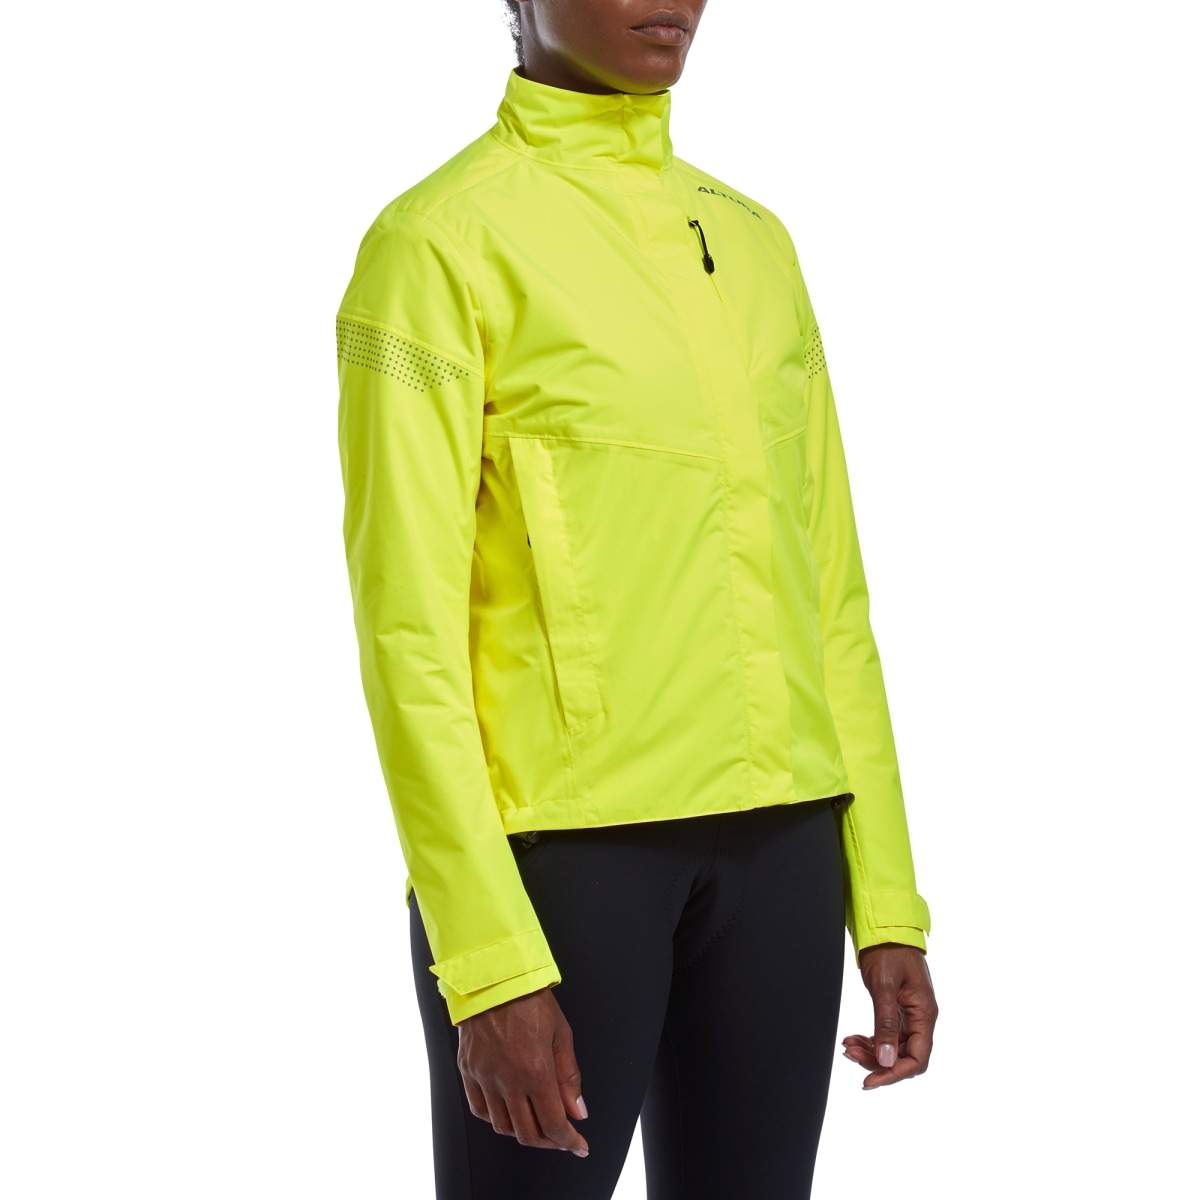 Cycles UK Altura  Nevis Nightvision Womens Jacket 8 YELLOW